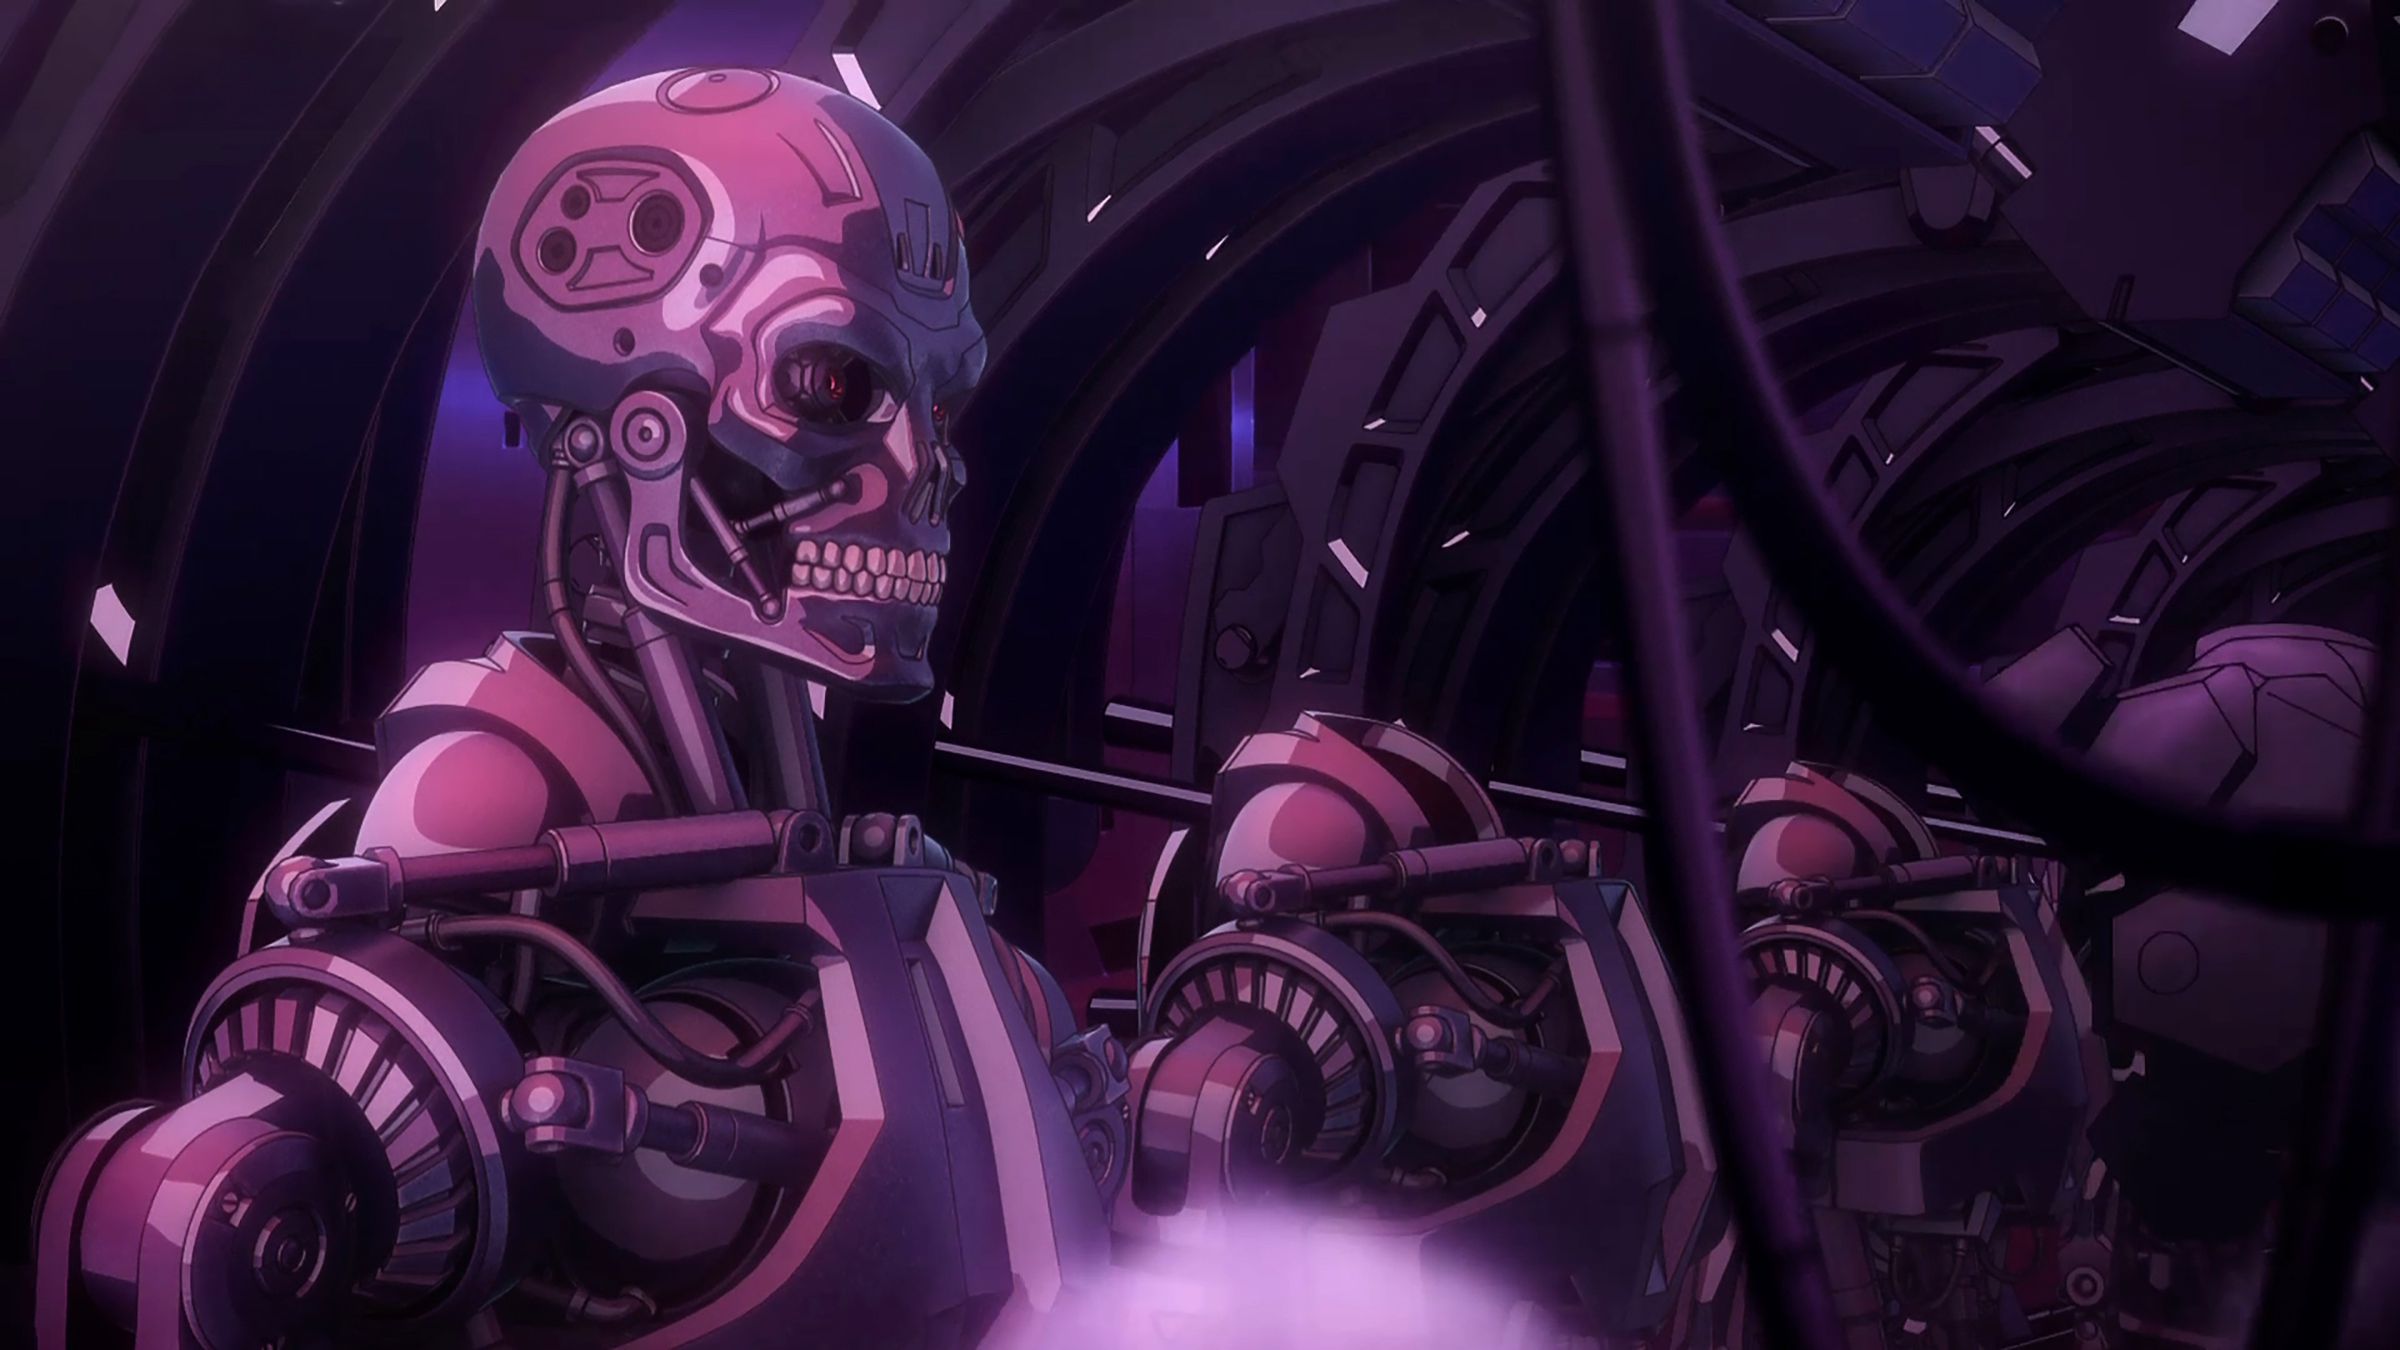 A still image from the animated Netflix series Terminator Zero.